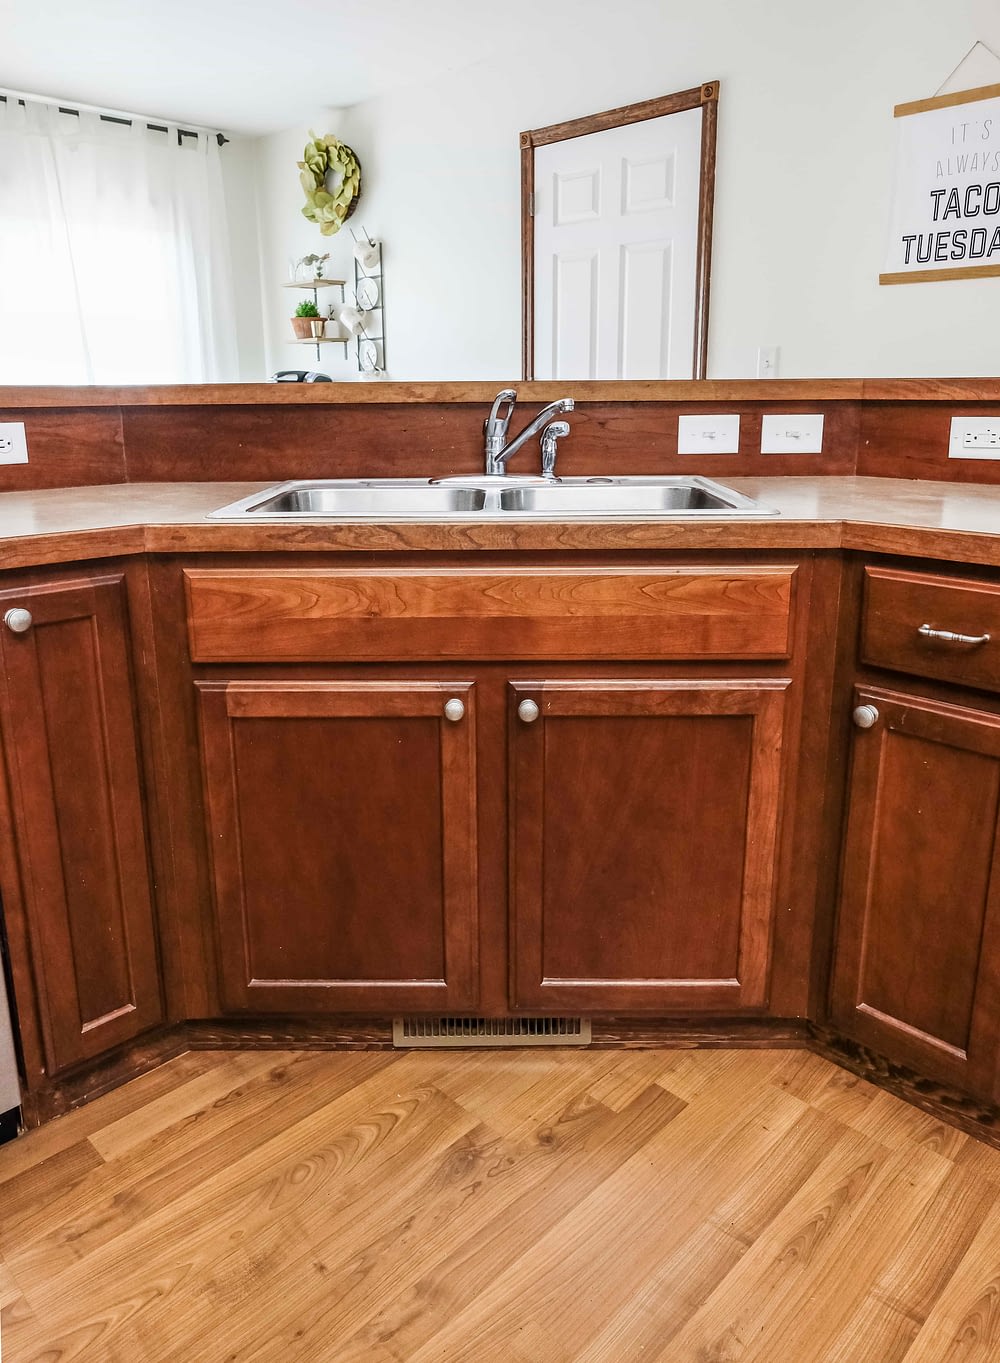 A stainless steel builder grade sink with dark wood cabinets